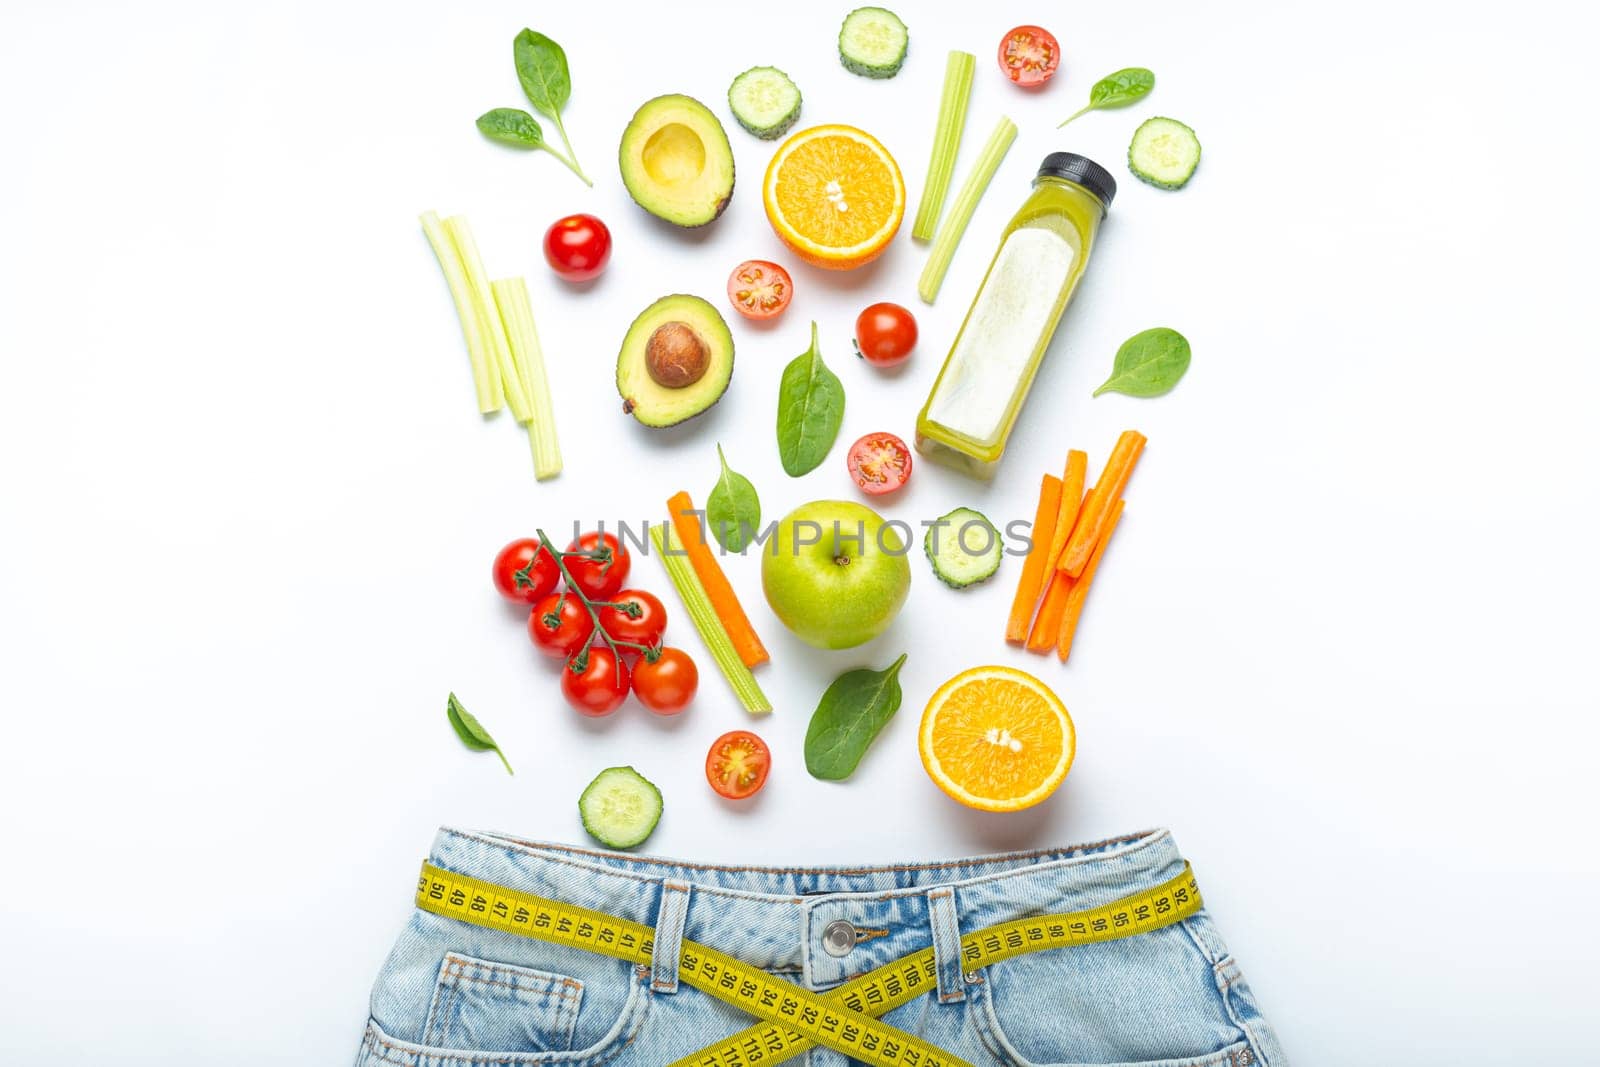 Fresh fruit, vegetables, smoothie falling into jeans and yellow measuring tape as a belt on white background. Concept of healthy food for weight loss, detox, diet, healthy clean nutrition